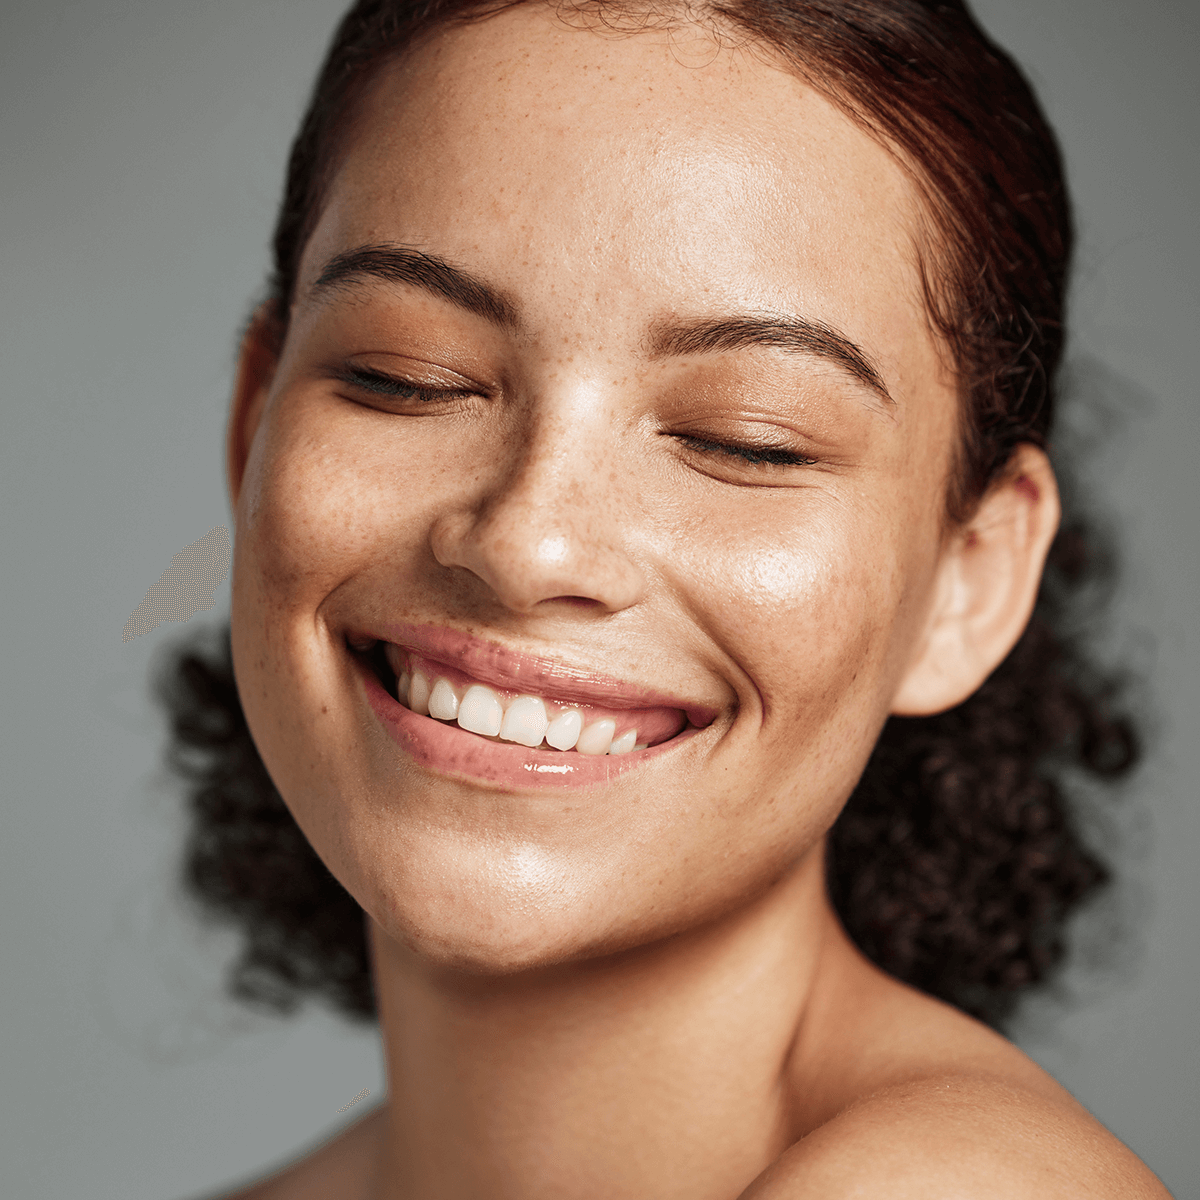 Woman with freckles smiling